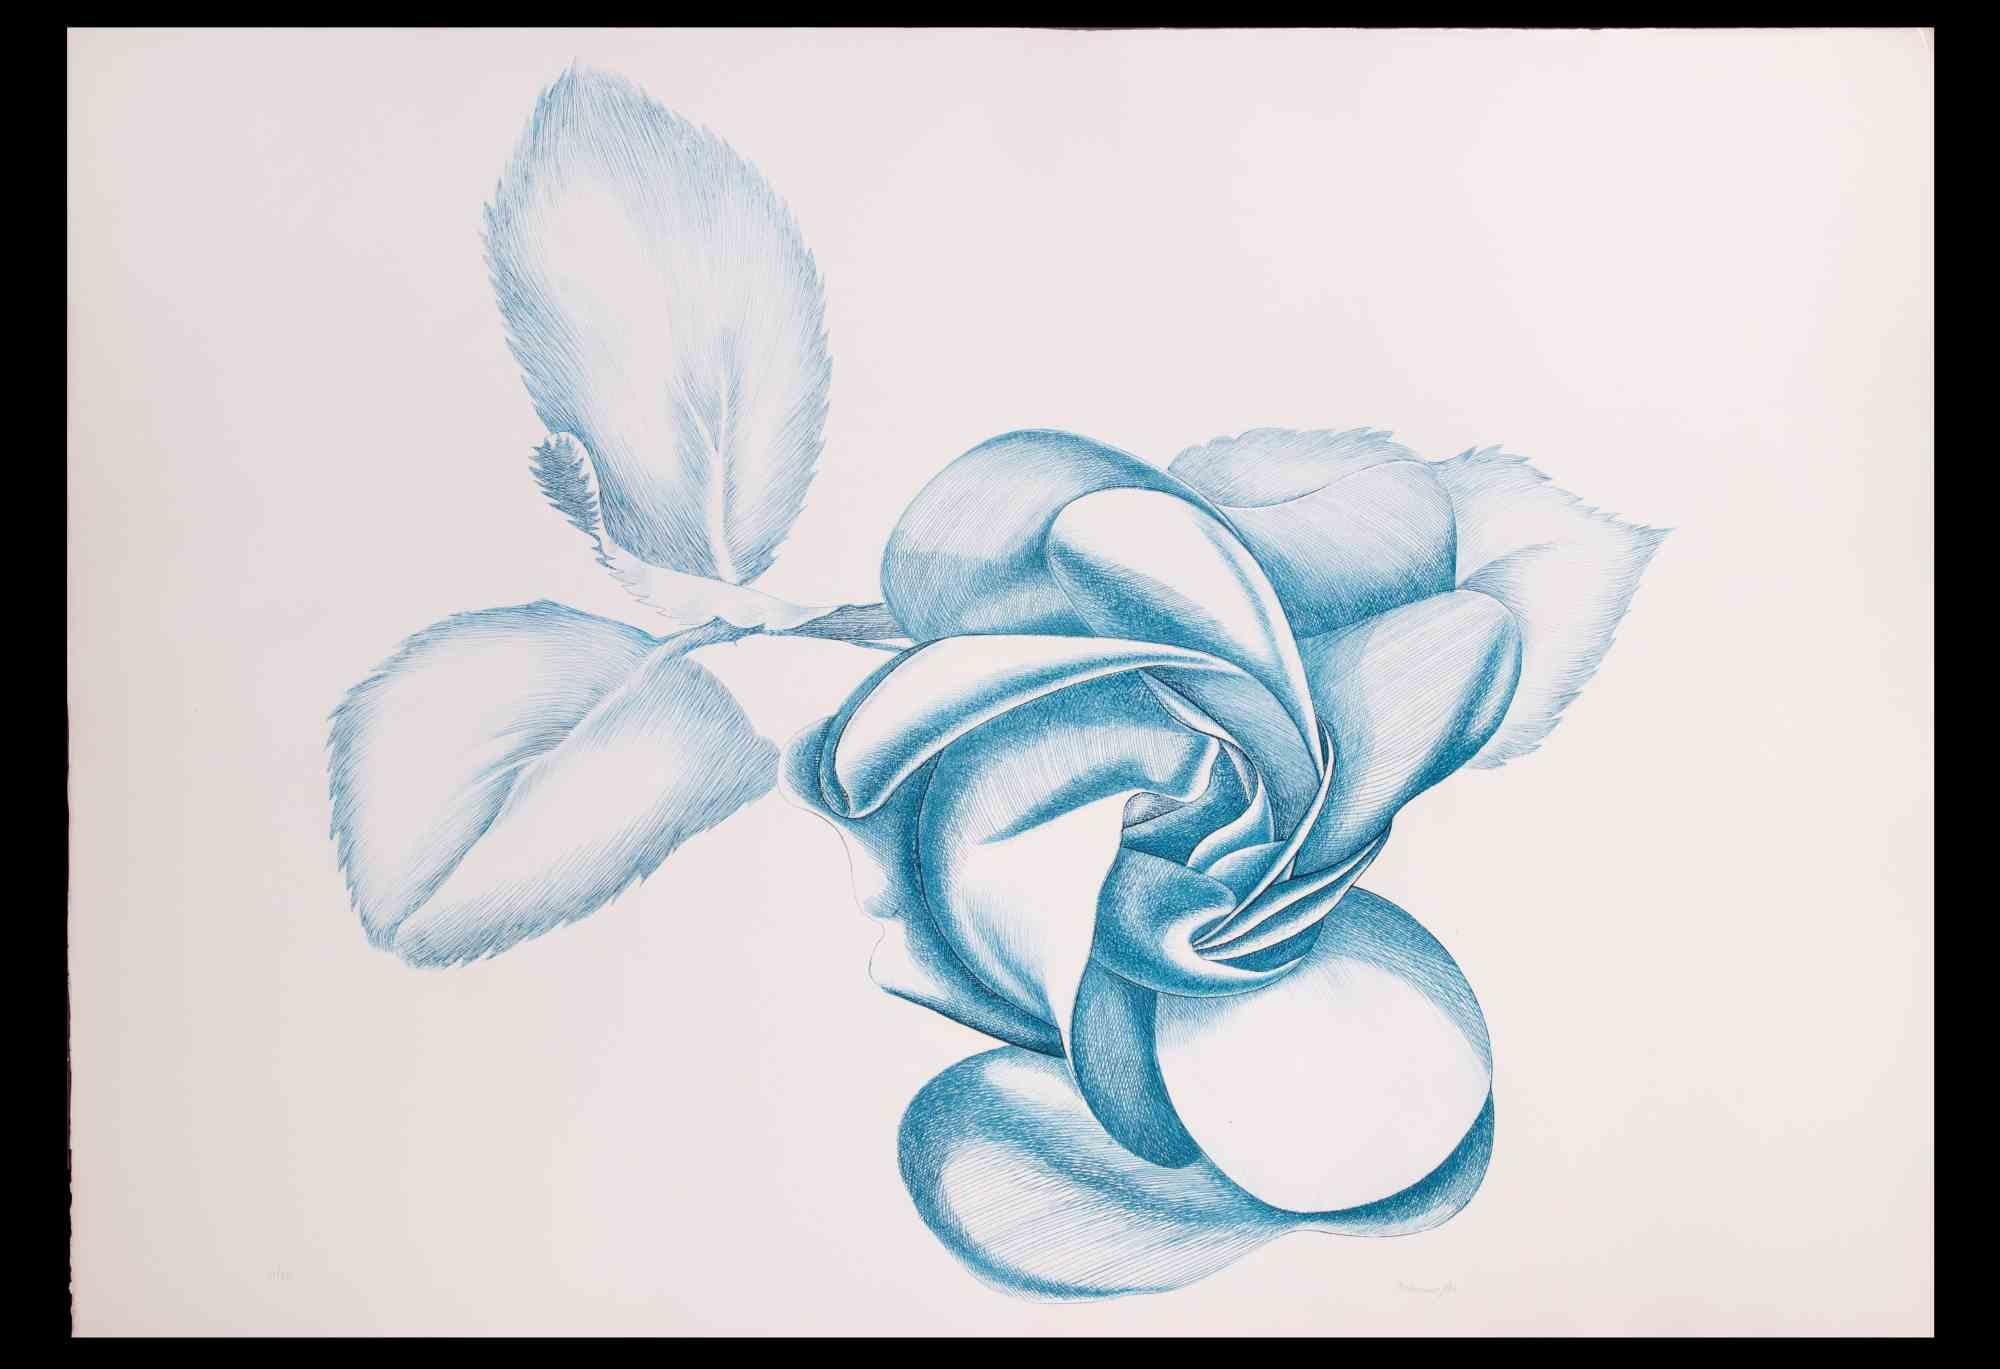 Blue Rose is an original contemporary artwork realized by Giacomo Porzano in 1970s.

Colored etching

Hand-signed on the lower right.

Numbered on the lower left.

Edition 31/50.

Giacomo Porzano was born in Lerici on November 21, 1925 and died in